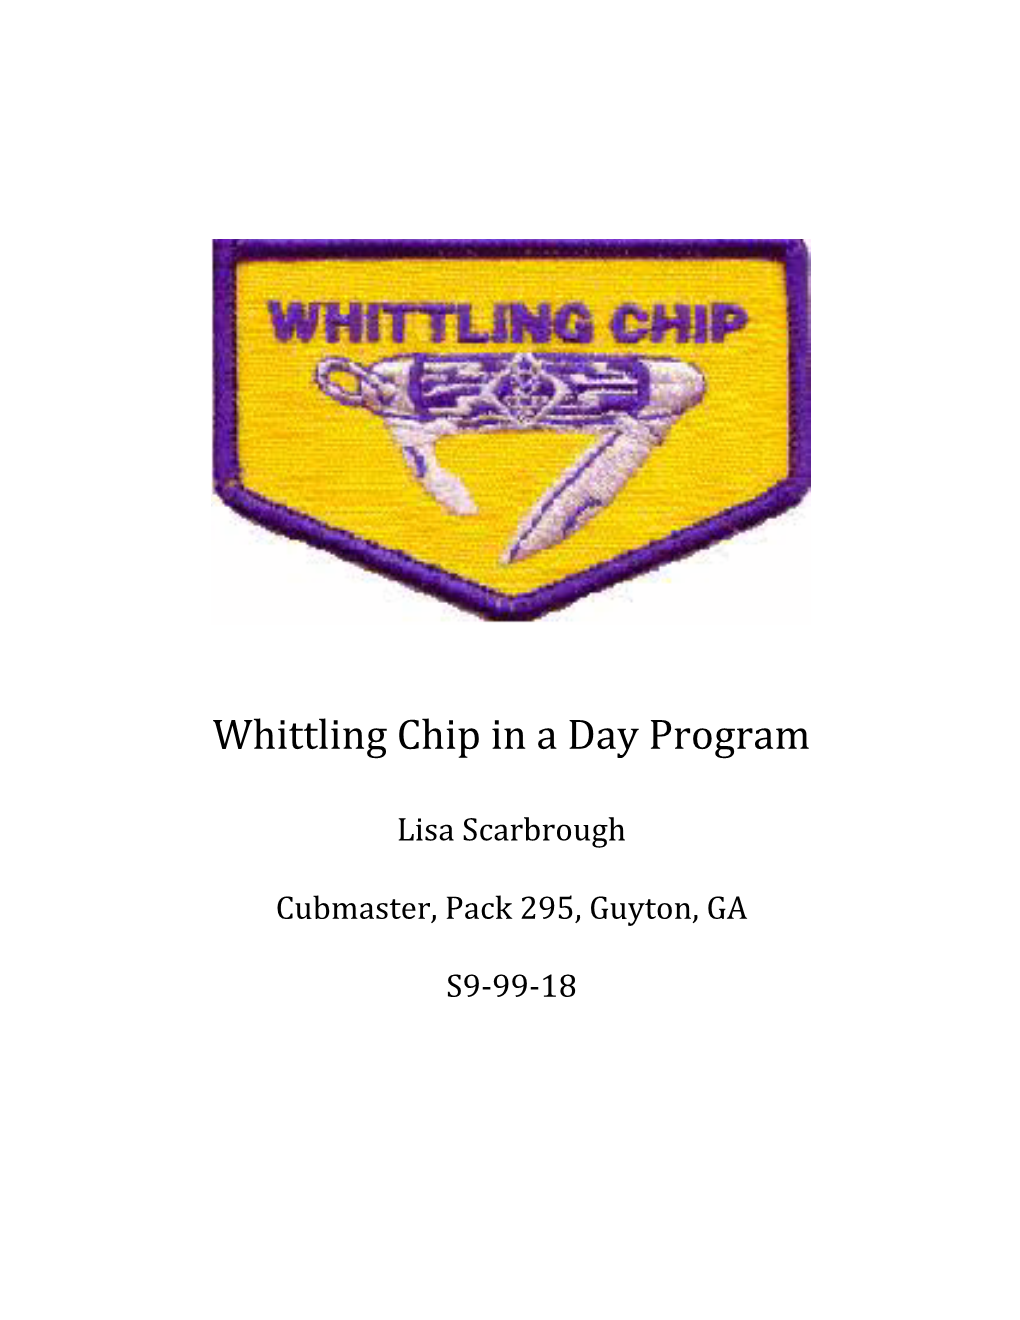 Whittling Chip in a Day Program